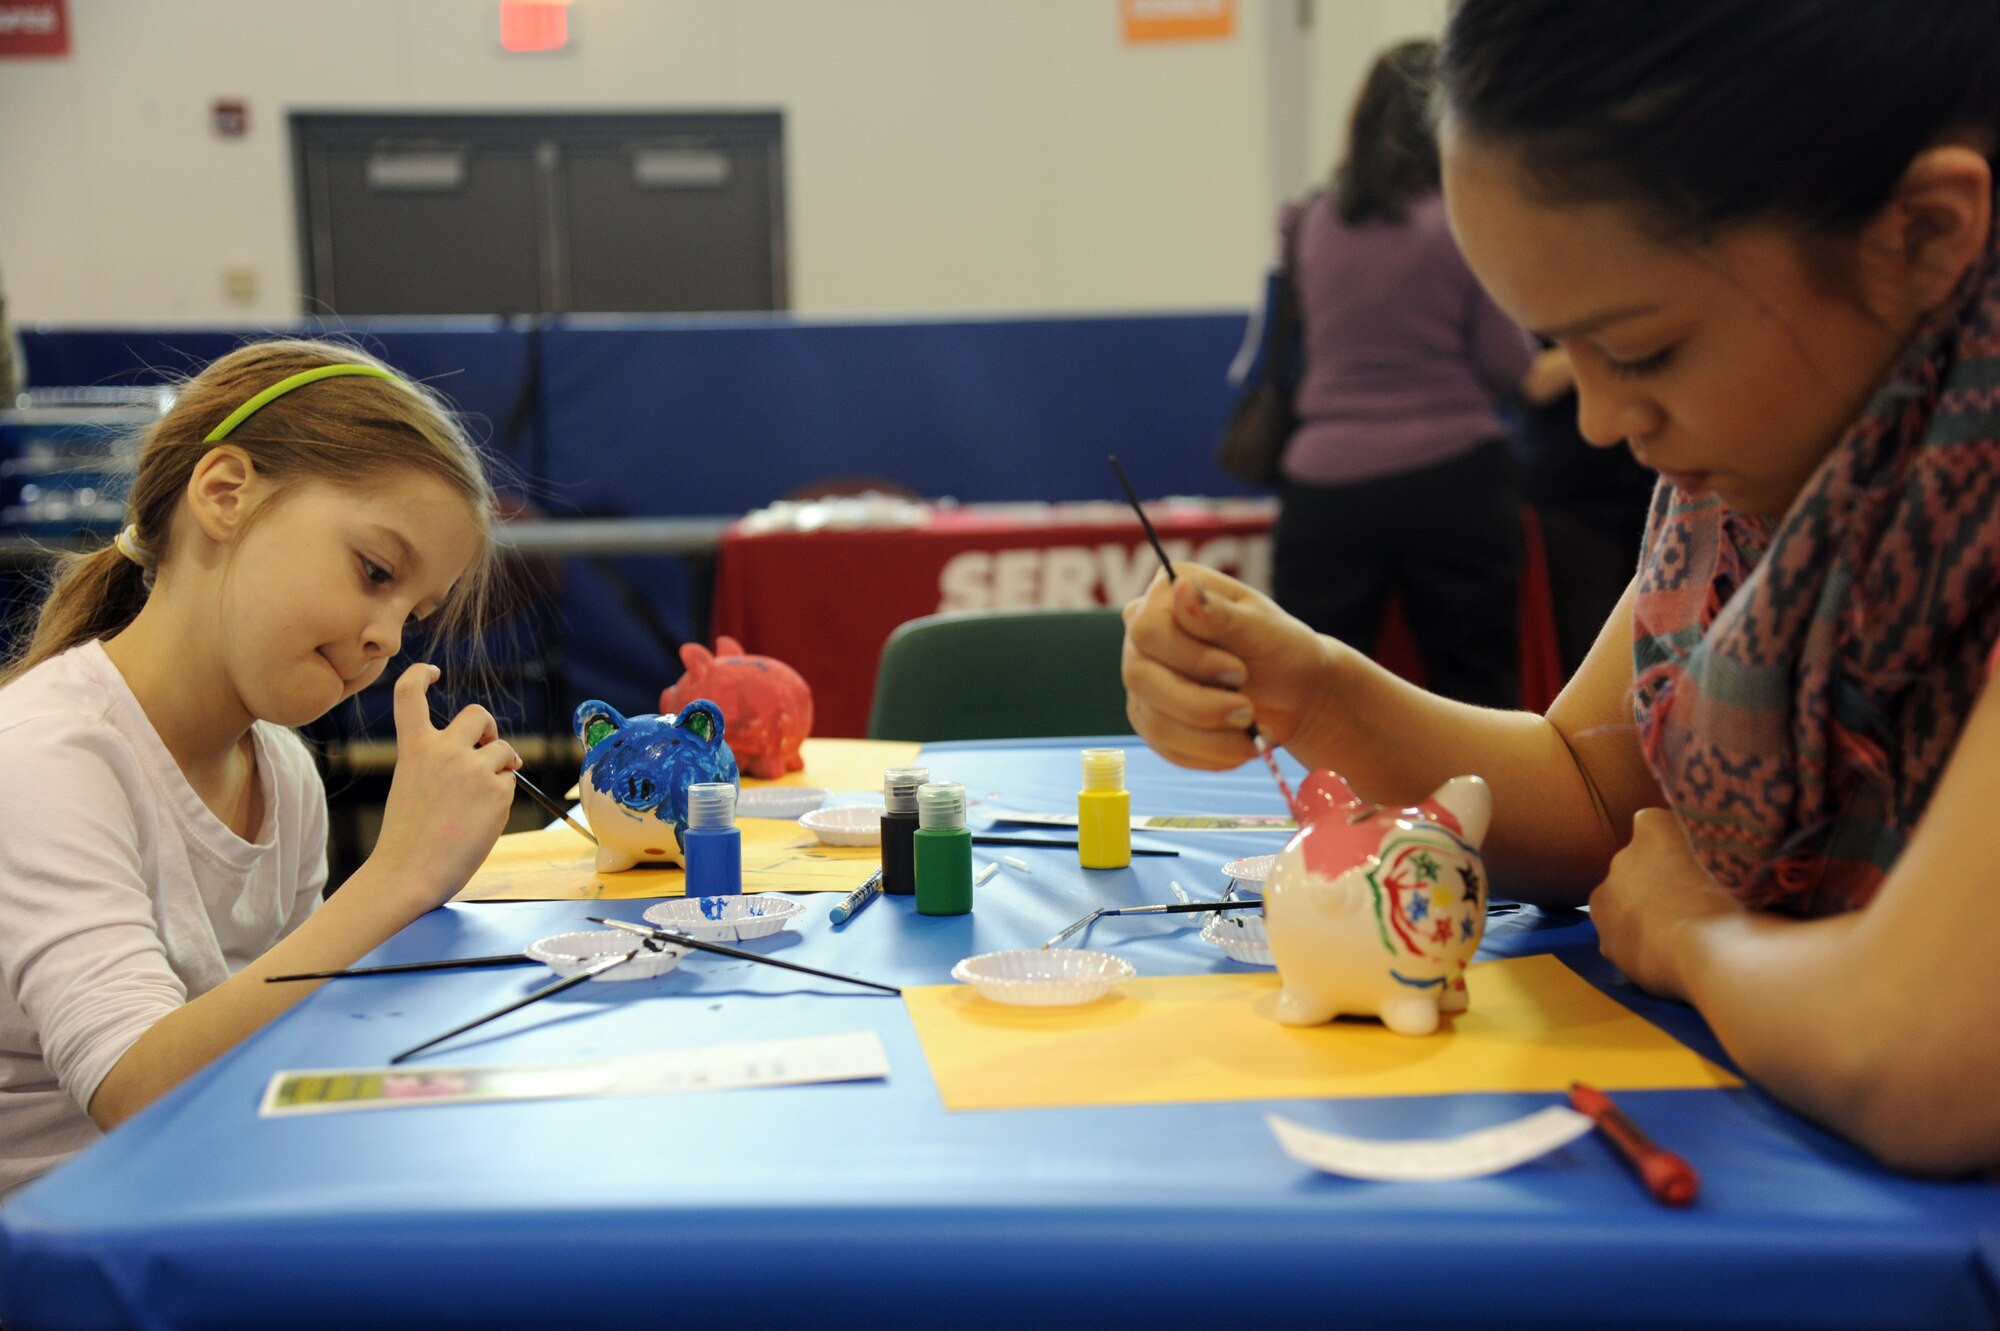 Daria McNerney, 8, and Nelenah Greyeyes, 15, paint piggy banks at the Military Saves Financial Fair on Grand Forks Air Force Base, N.D., Feb. 25, 2015. The fair was hosted by the Airman & Family Readiness Center and featured activities for children and helpful finance information for adults. (U.S. Air Force photo by Tech. Sgt. David Dobrydney/released)
